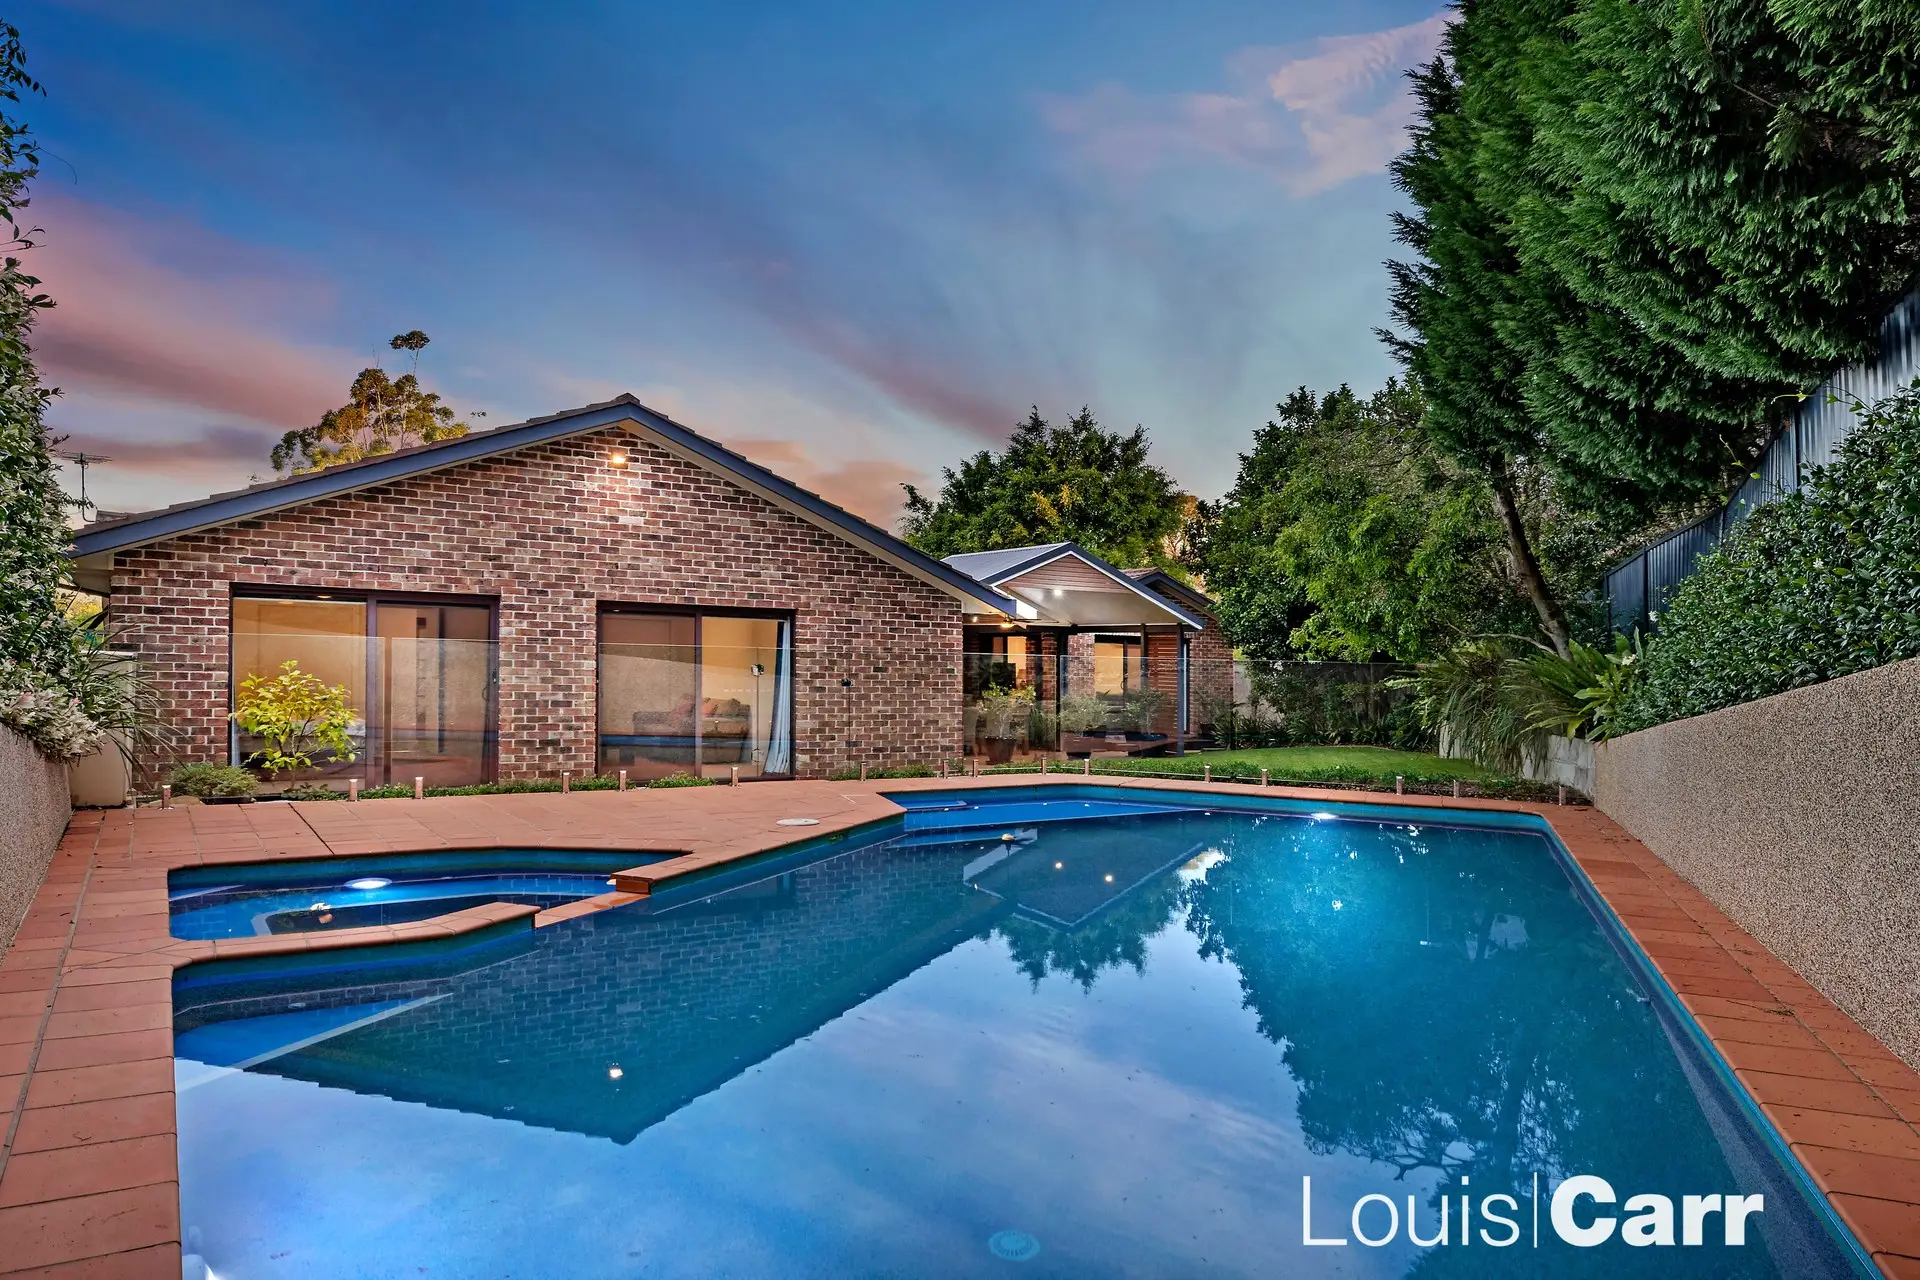 Photo #4: 53 Carinda Drive, Glenhaven - Sold by Louis Carr Real Estate